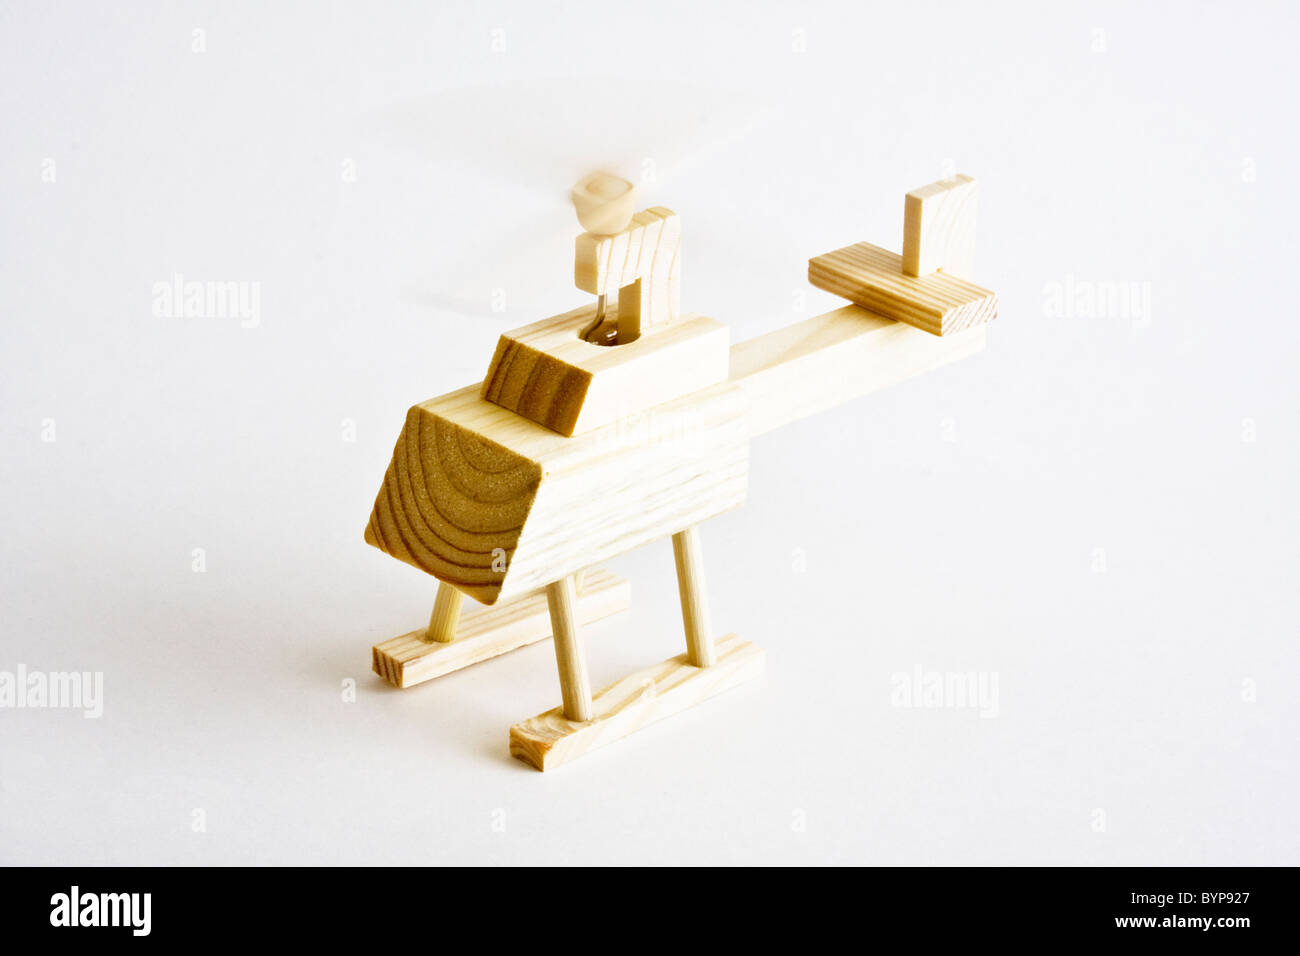 Wooden toy helicopter with spinning blade on white background Stock Photo